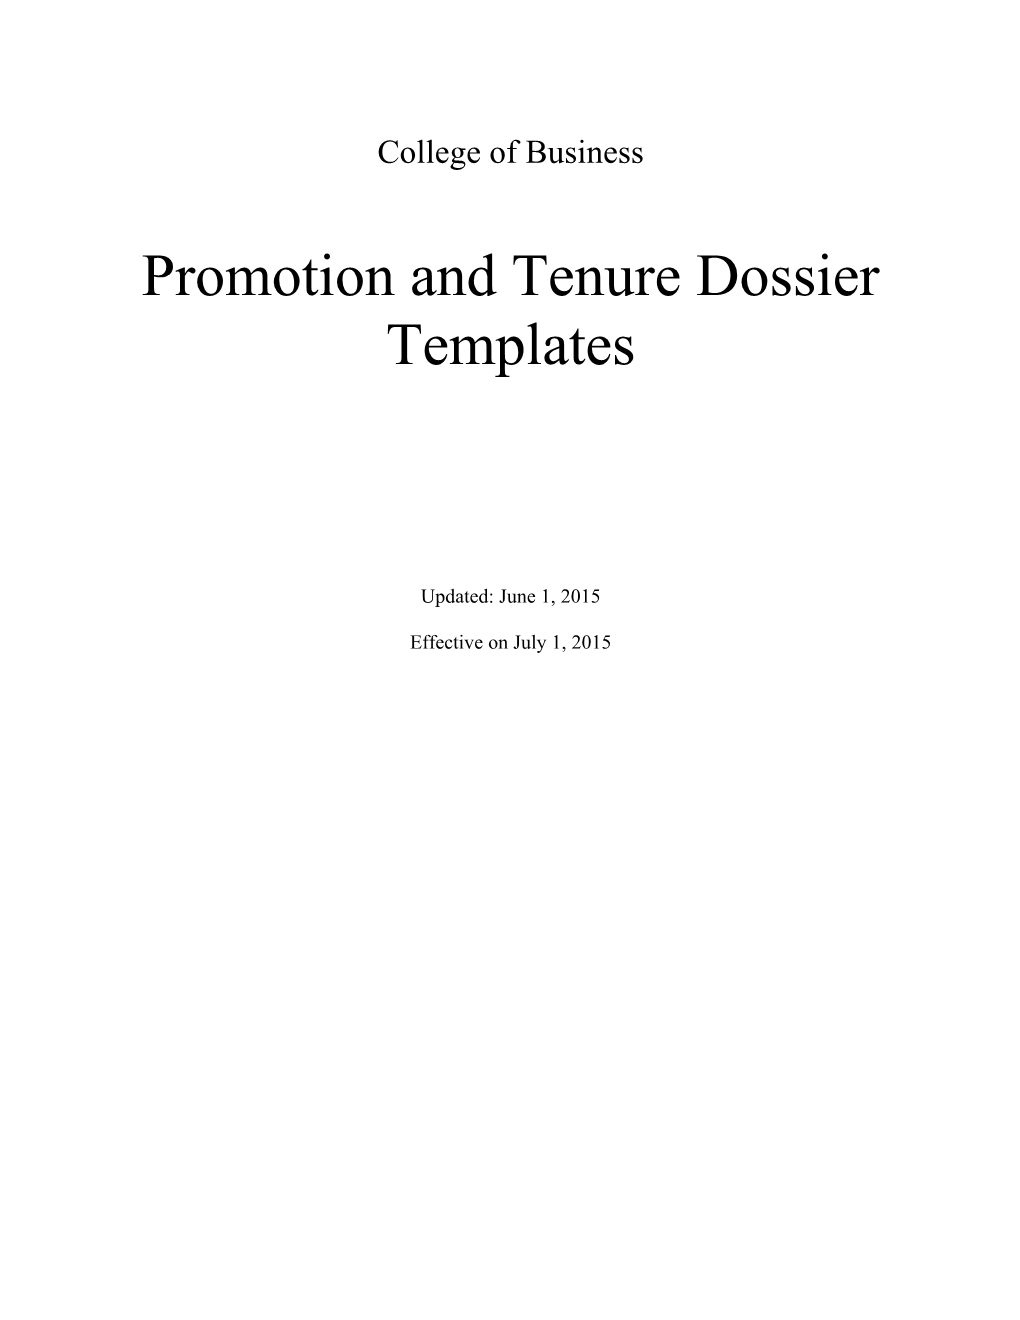 Promotion and Tenuredossier Templates